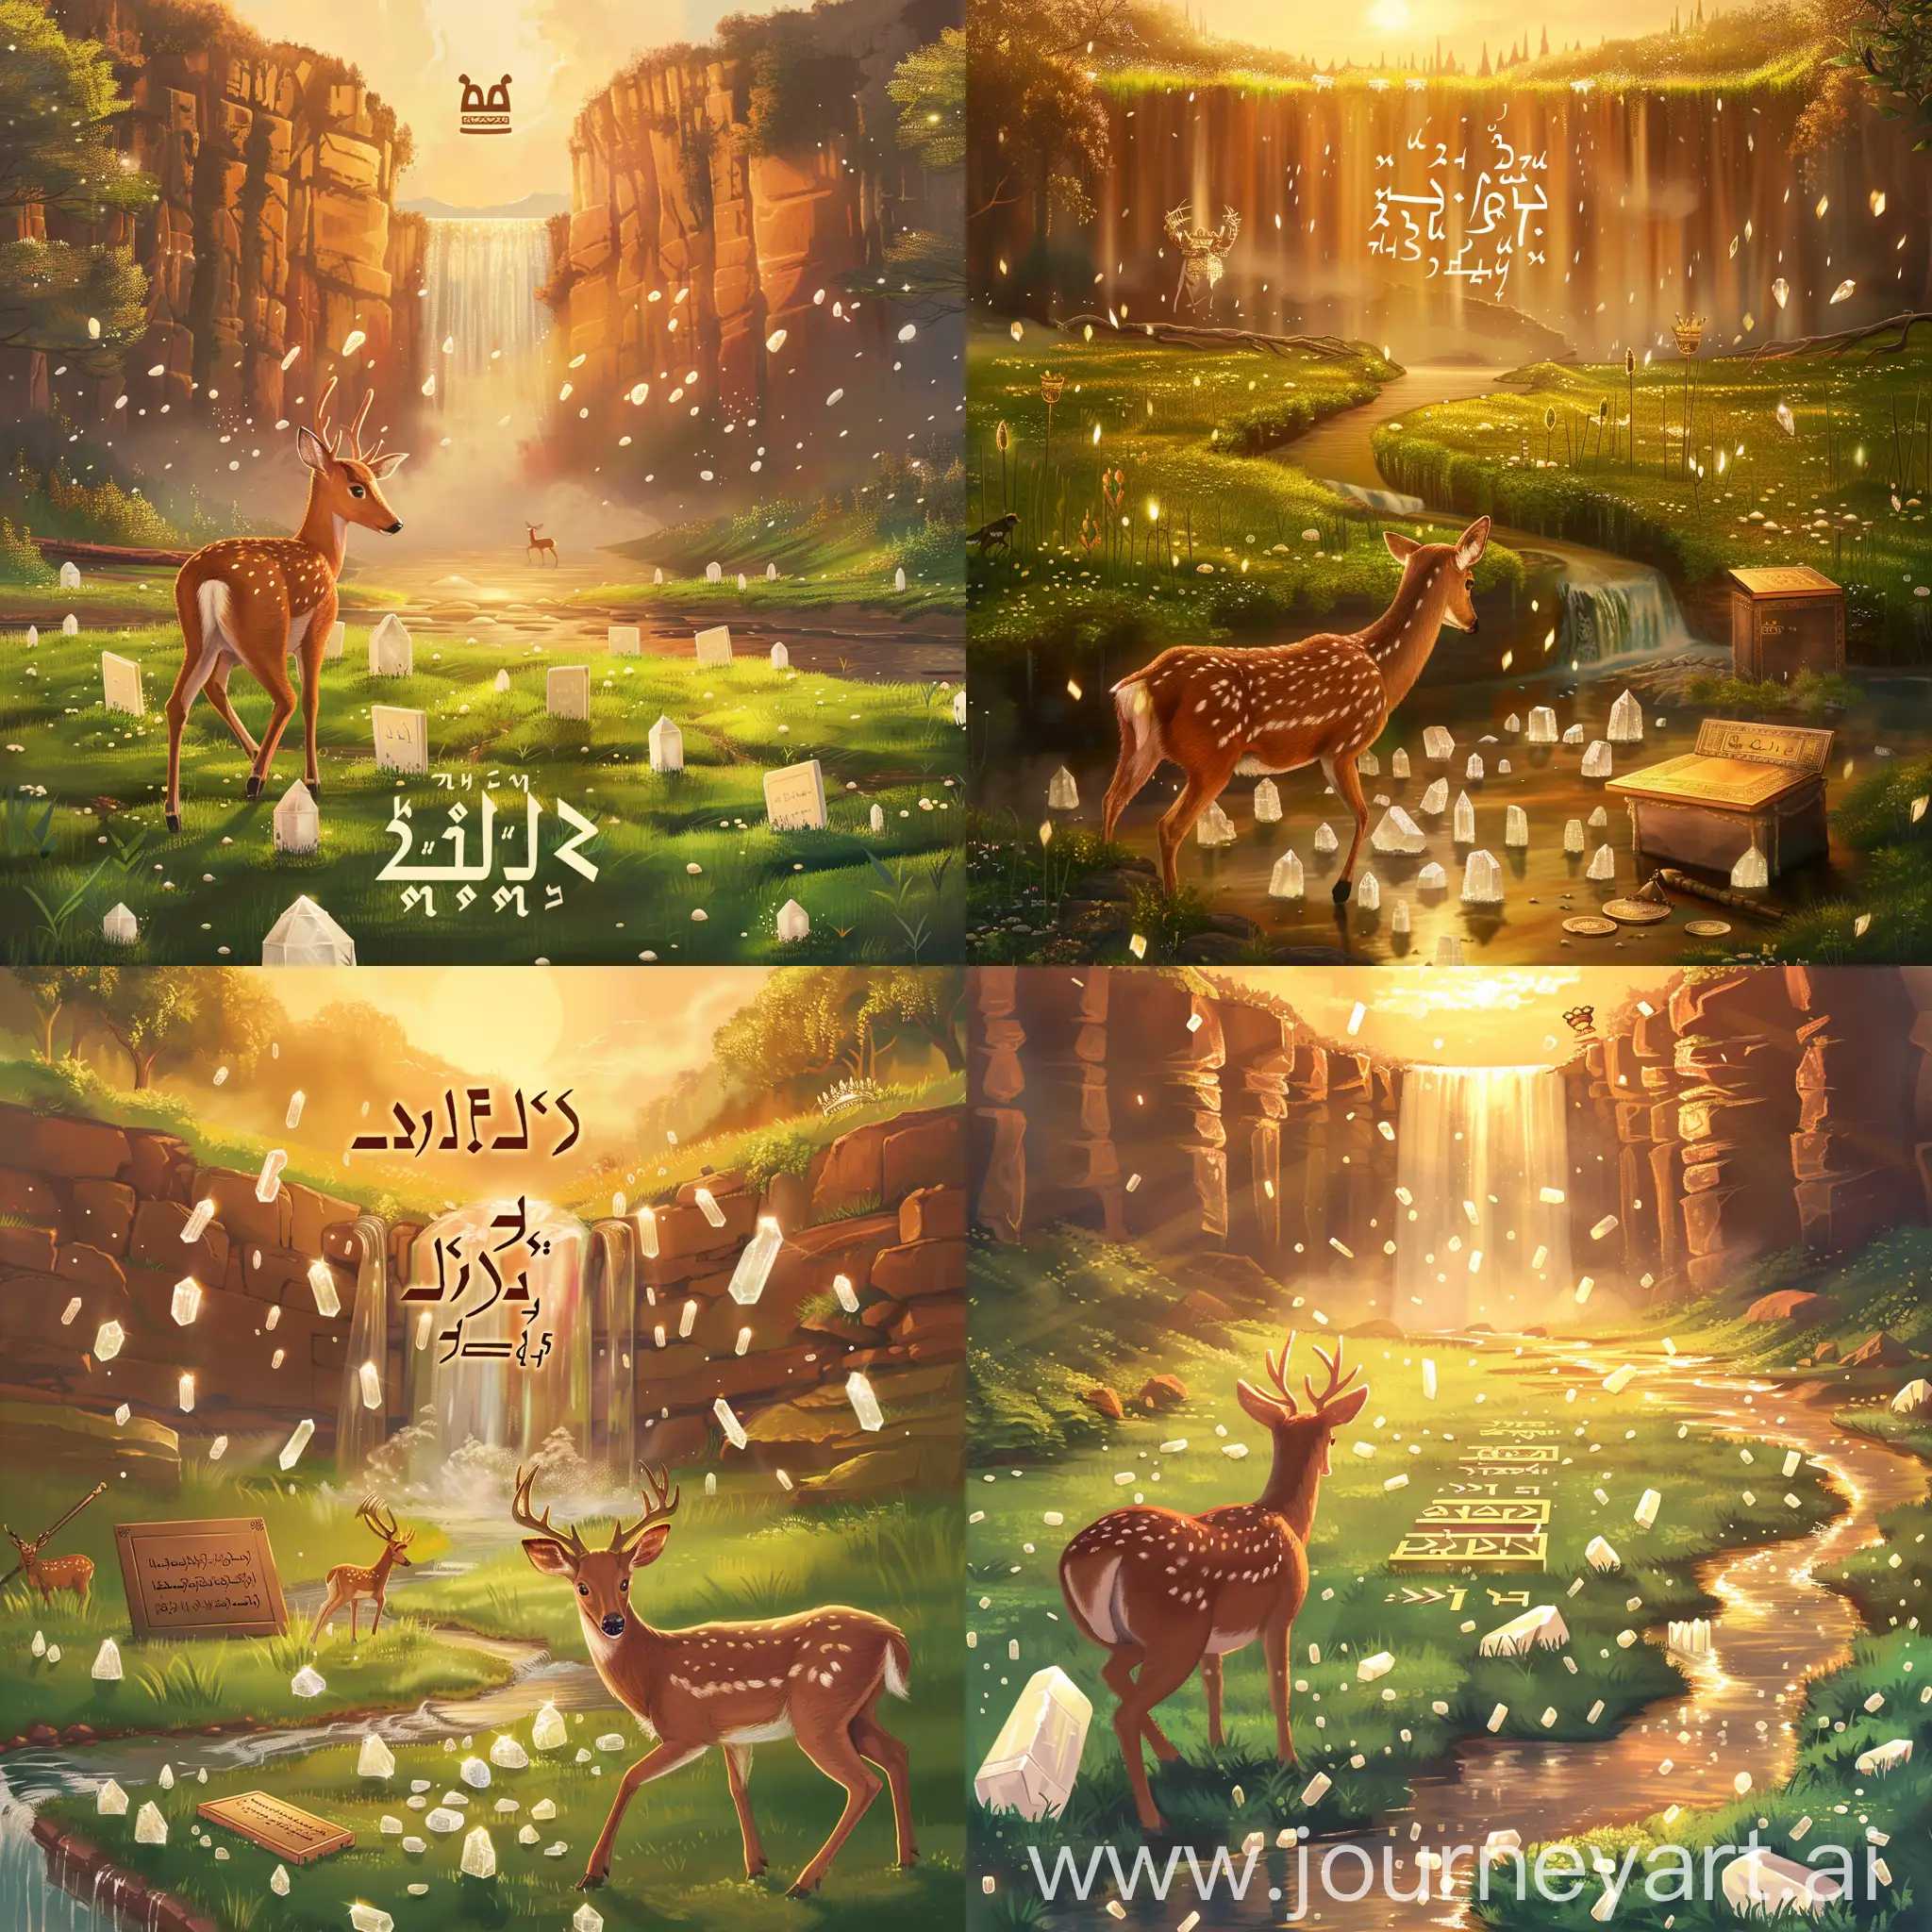 Create a vibrant and mystical wallpaper featuring the name 'משה צבי' in elegant Torah script in Hebrew at the center. The setting is a serene landscape with a river or waterfall, symbolizing Moshe, and lush green grass with white crystal-like pieces scattered throughout, representing manna. A deer, symbolizing 'צבי', looks back as it walks across the grass. Include the Tablets of Moses, subtly integrating a crown and Moses's staff if aesthetically pleasing. The scene is bathed in golden hour lighting, enhancing the mystical and divine atmosphere. The composition balances these elements harmoniously, capturing the essence of Moshe Tzvi's heritage and spiritual symbolism."  This approach aims to fulfill all aspects of your request while ensuring the image is beautifully composed and meaningful.